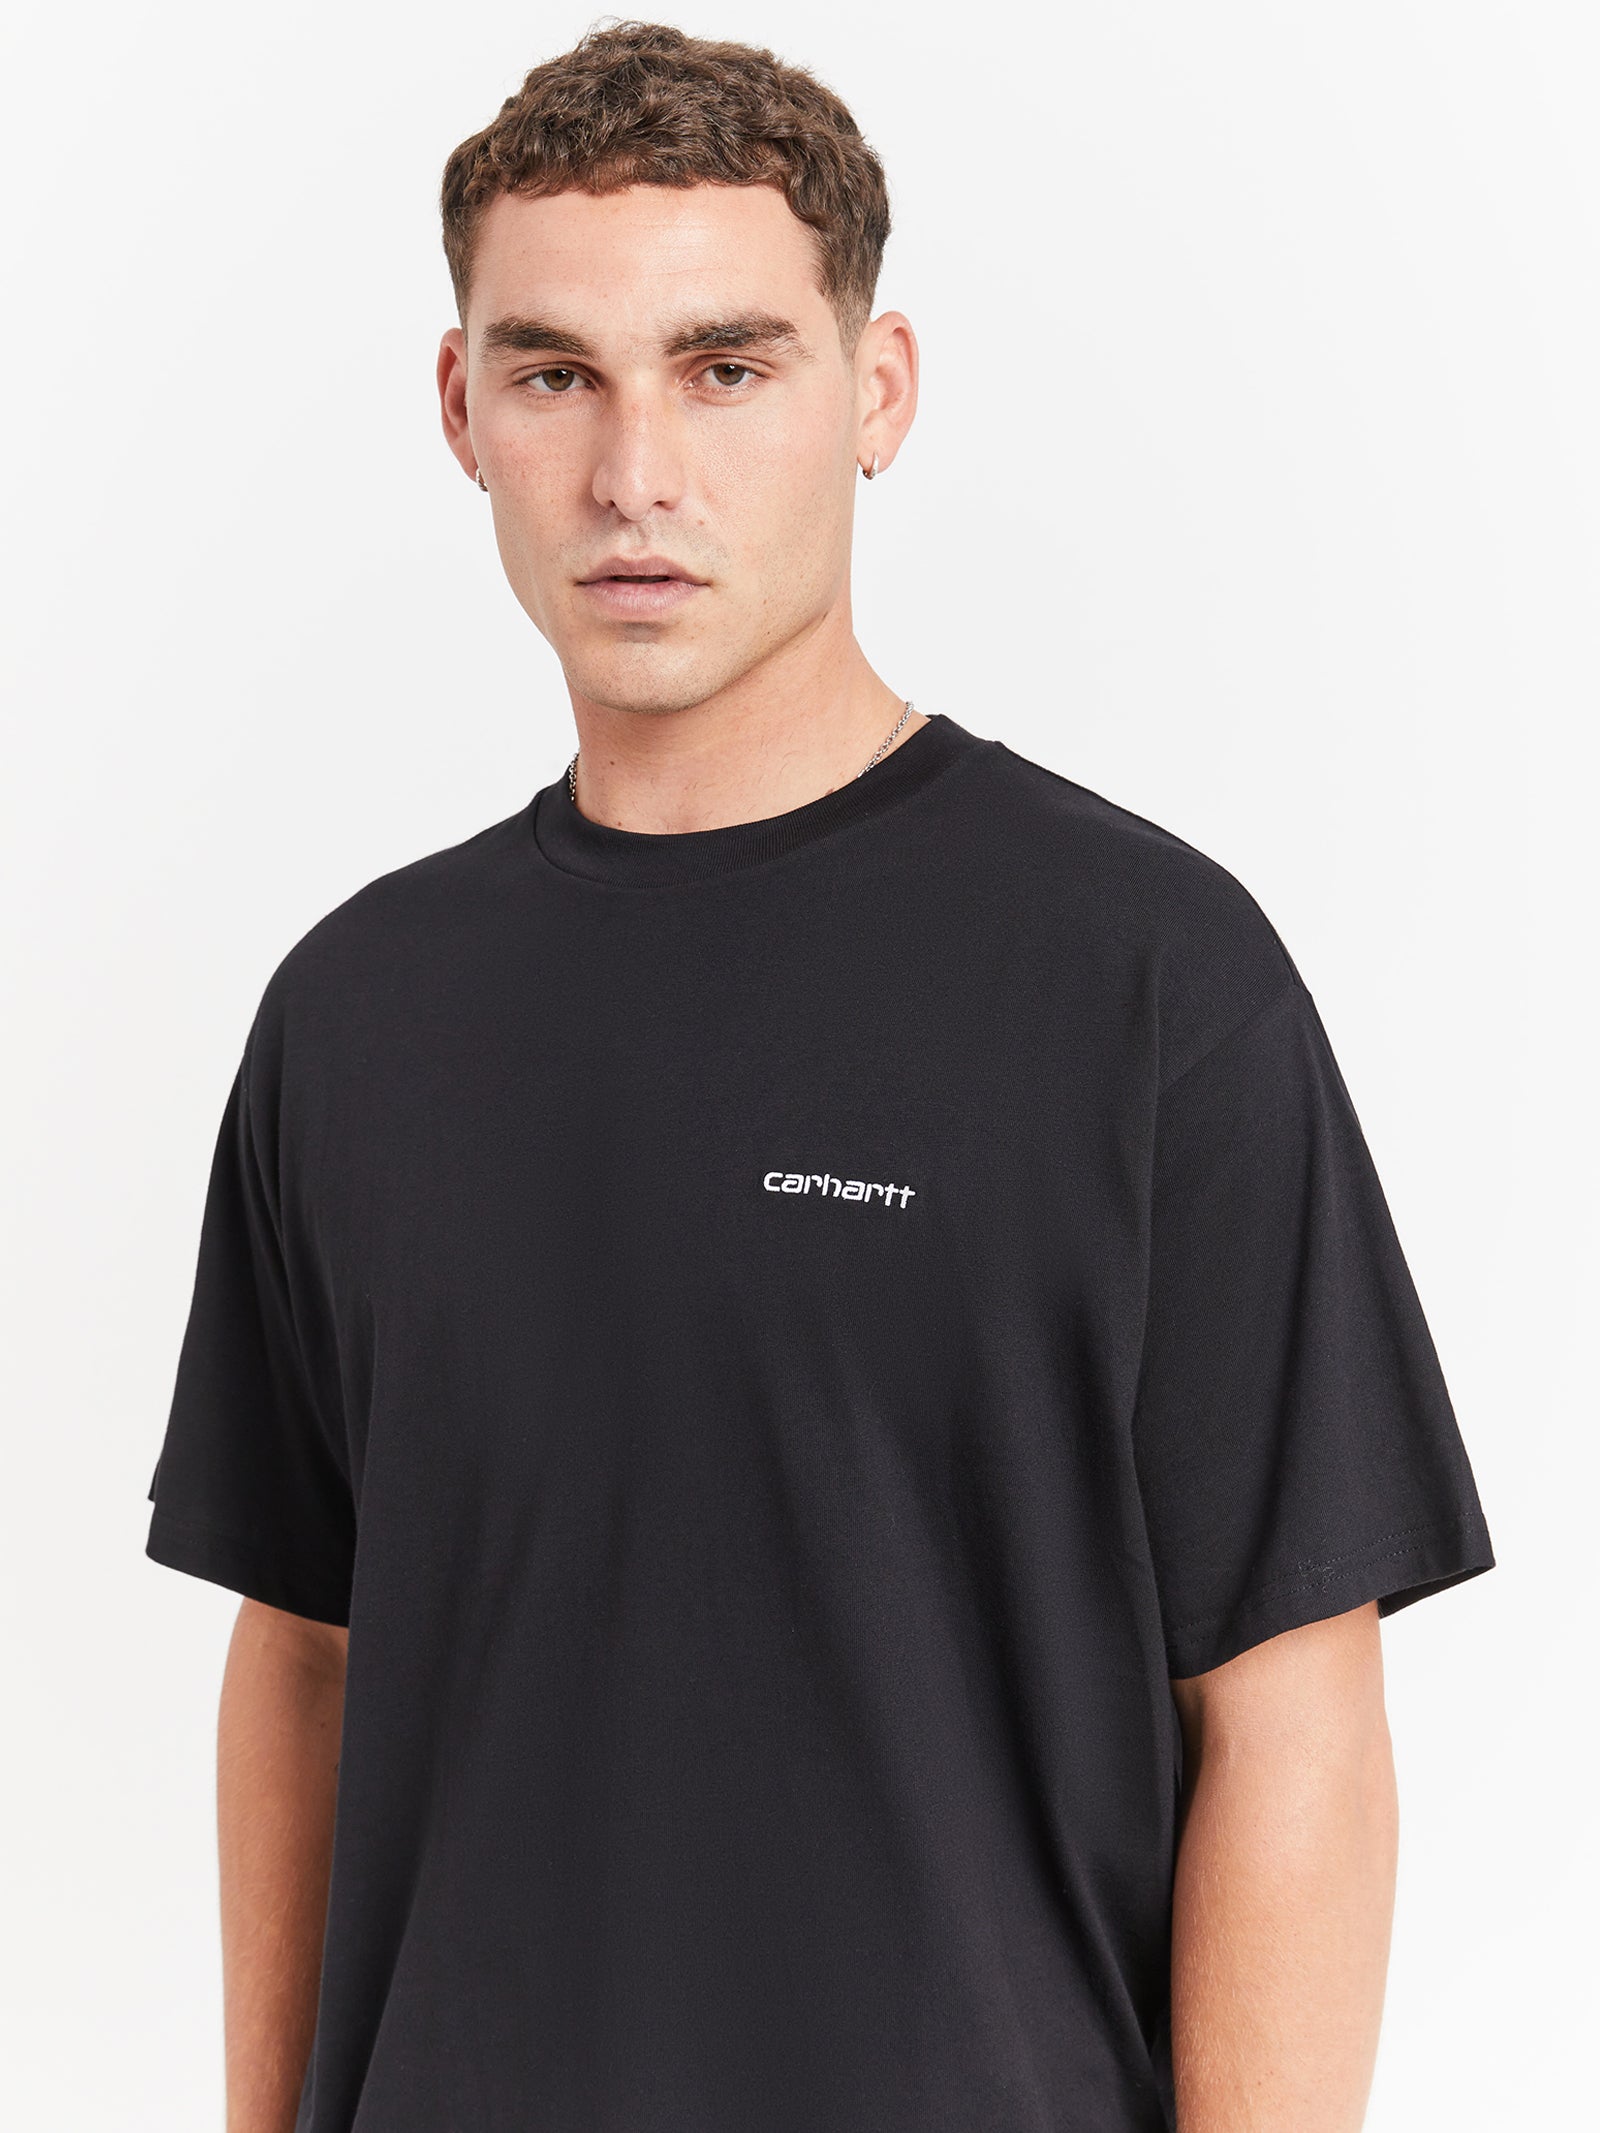 Script Embroidery T-Shirt in Black & White